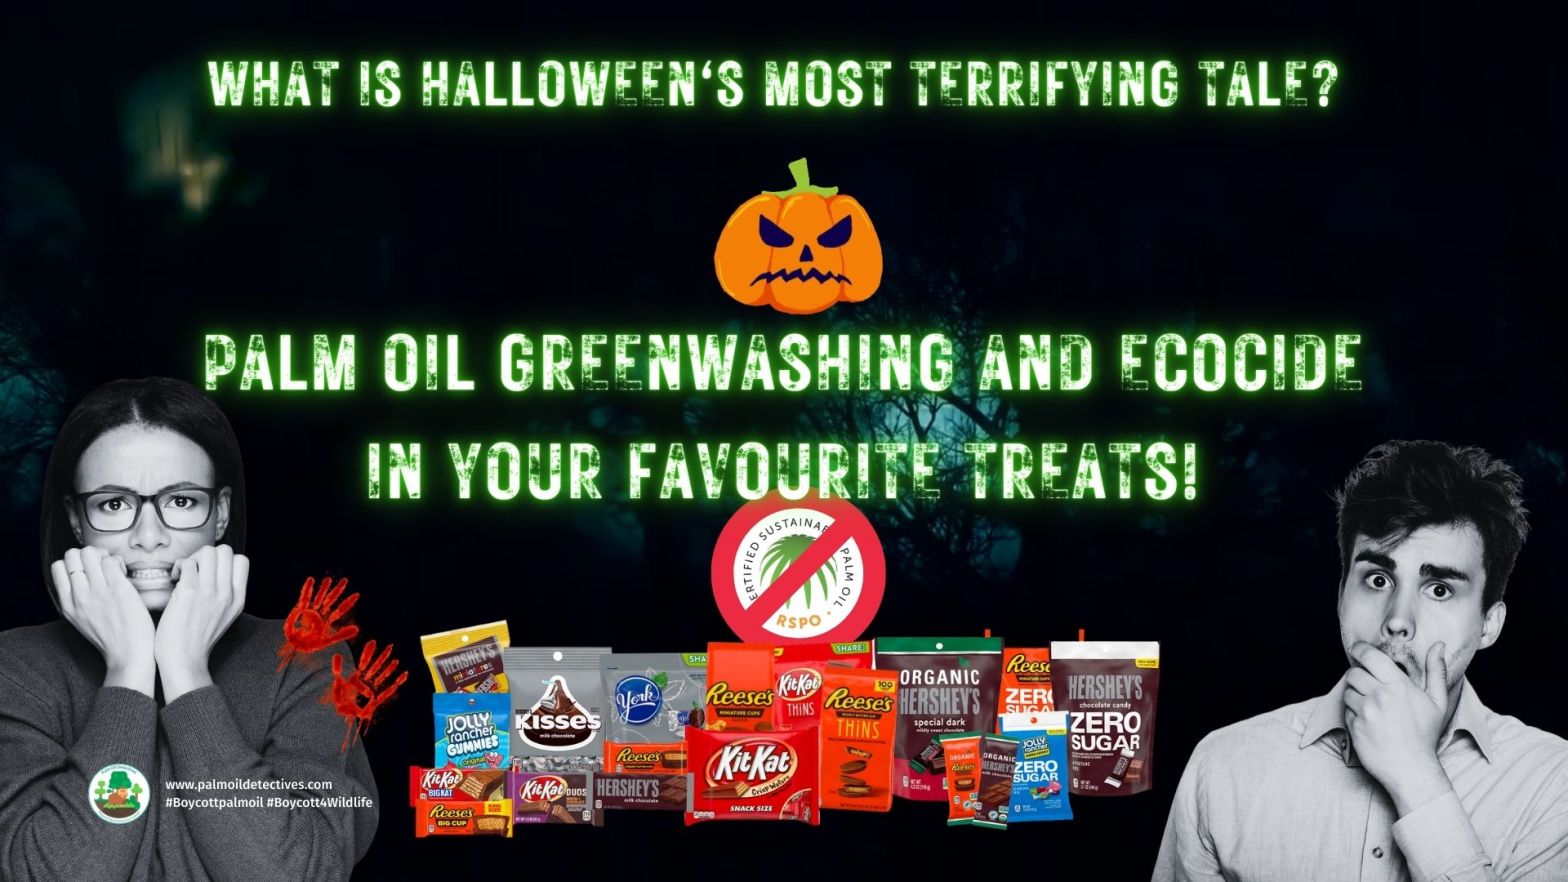 Whats halloweens most terrifying tale? palm oil ecocide and greenwashing in your Halloween treats!